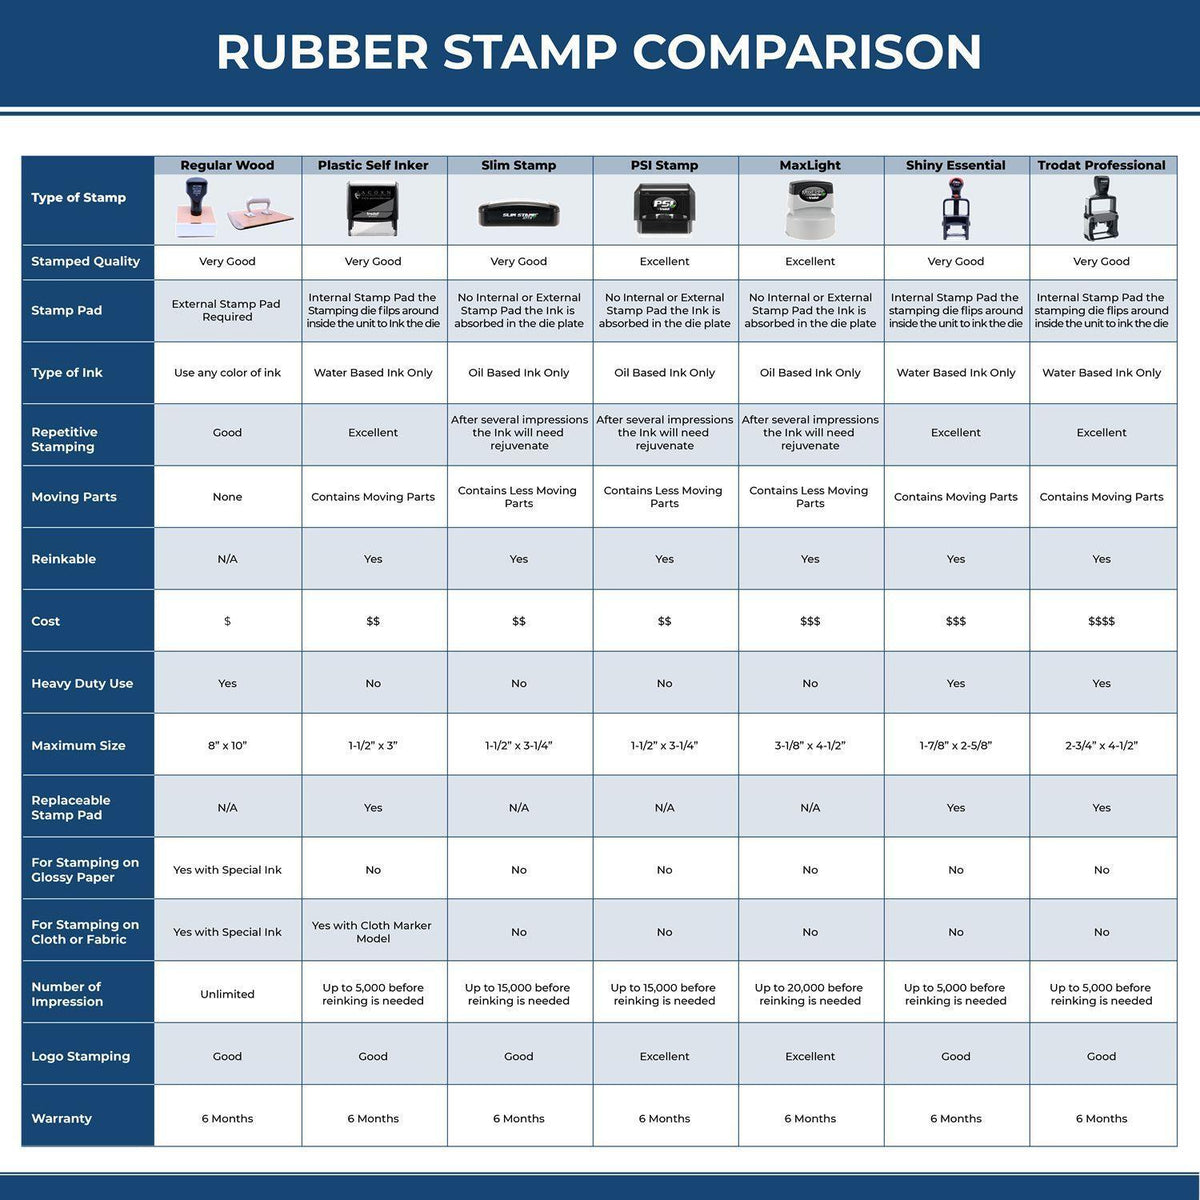 Large Much Better Keep Trying Rubber Stamp 5606R Rubber Stamp Comparison